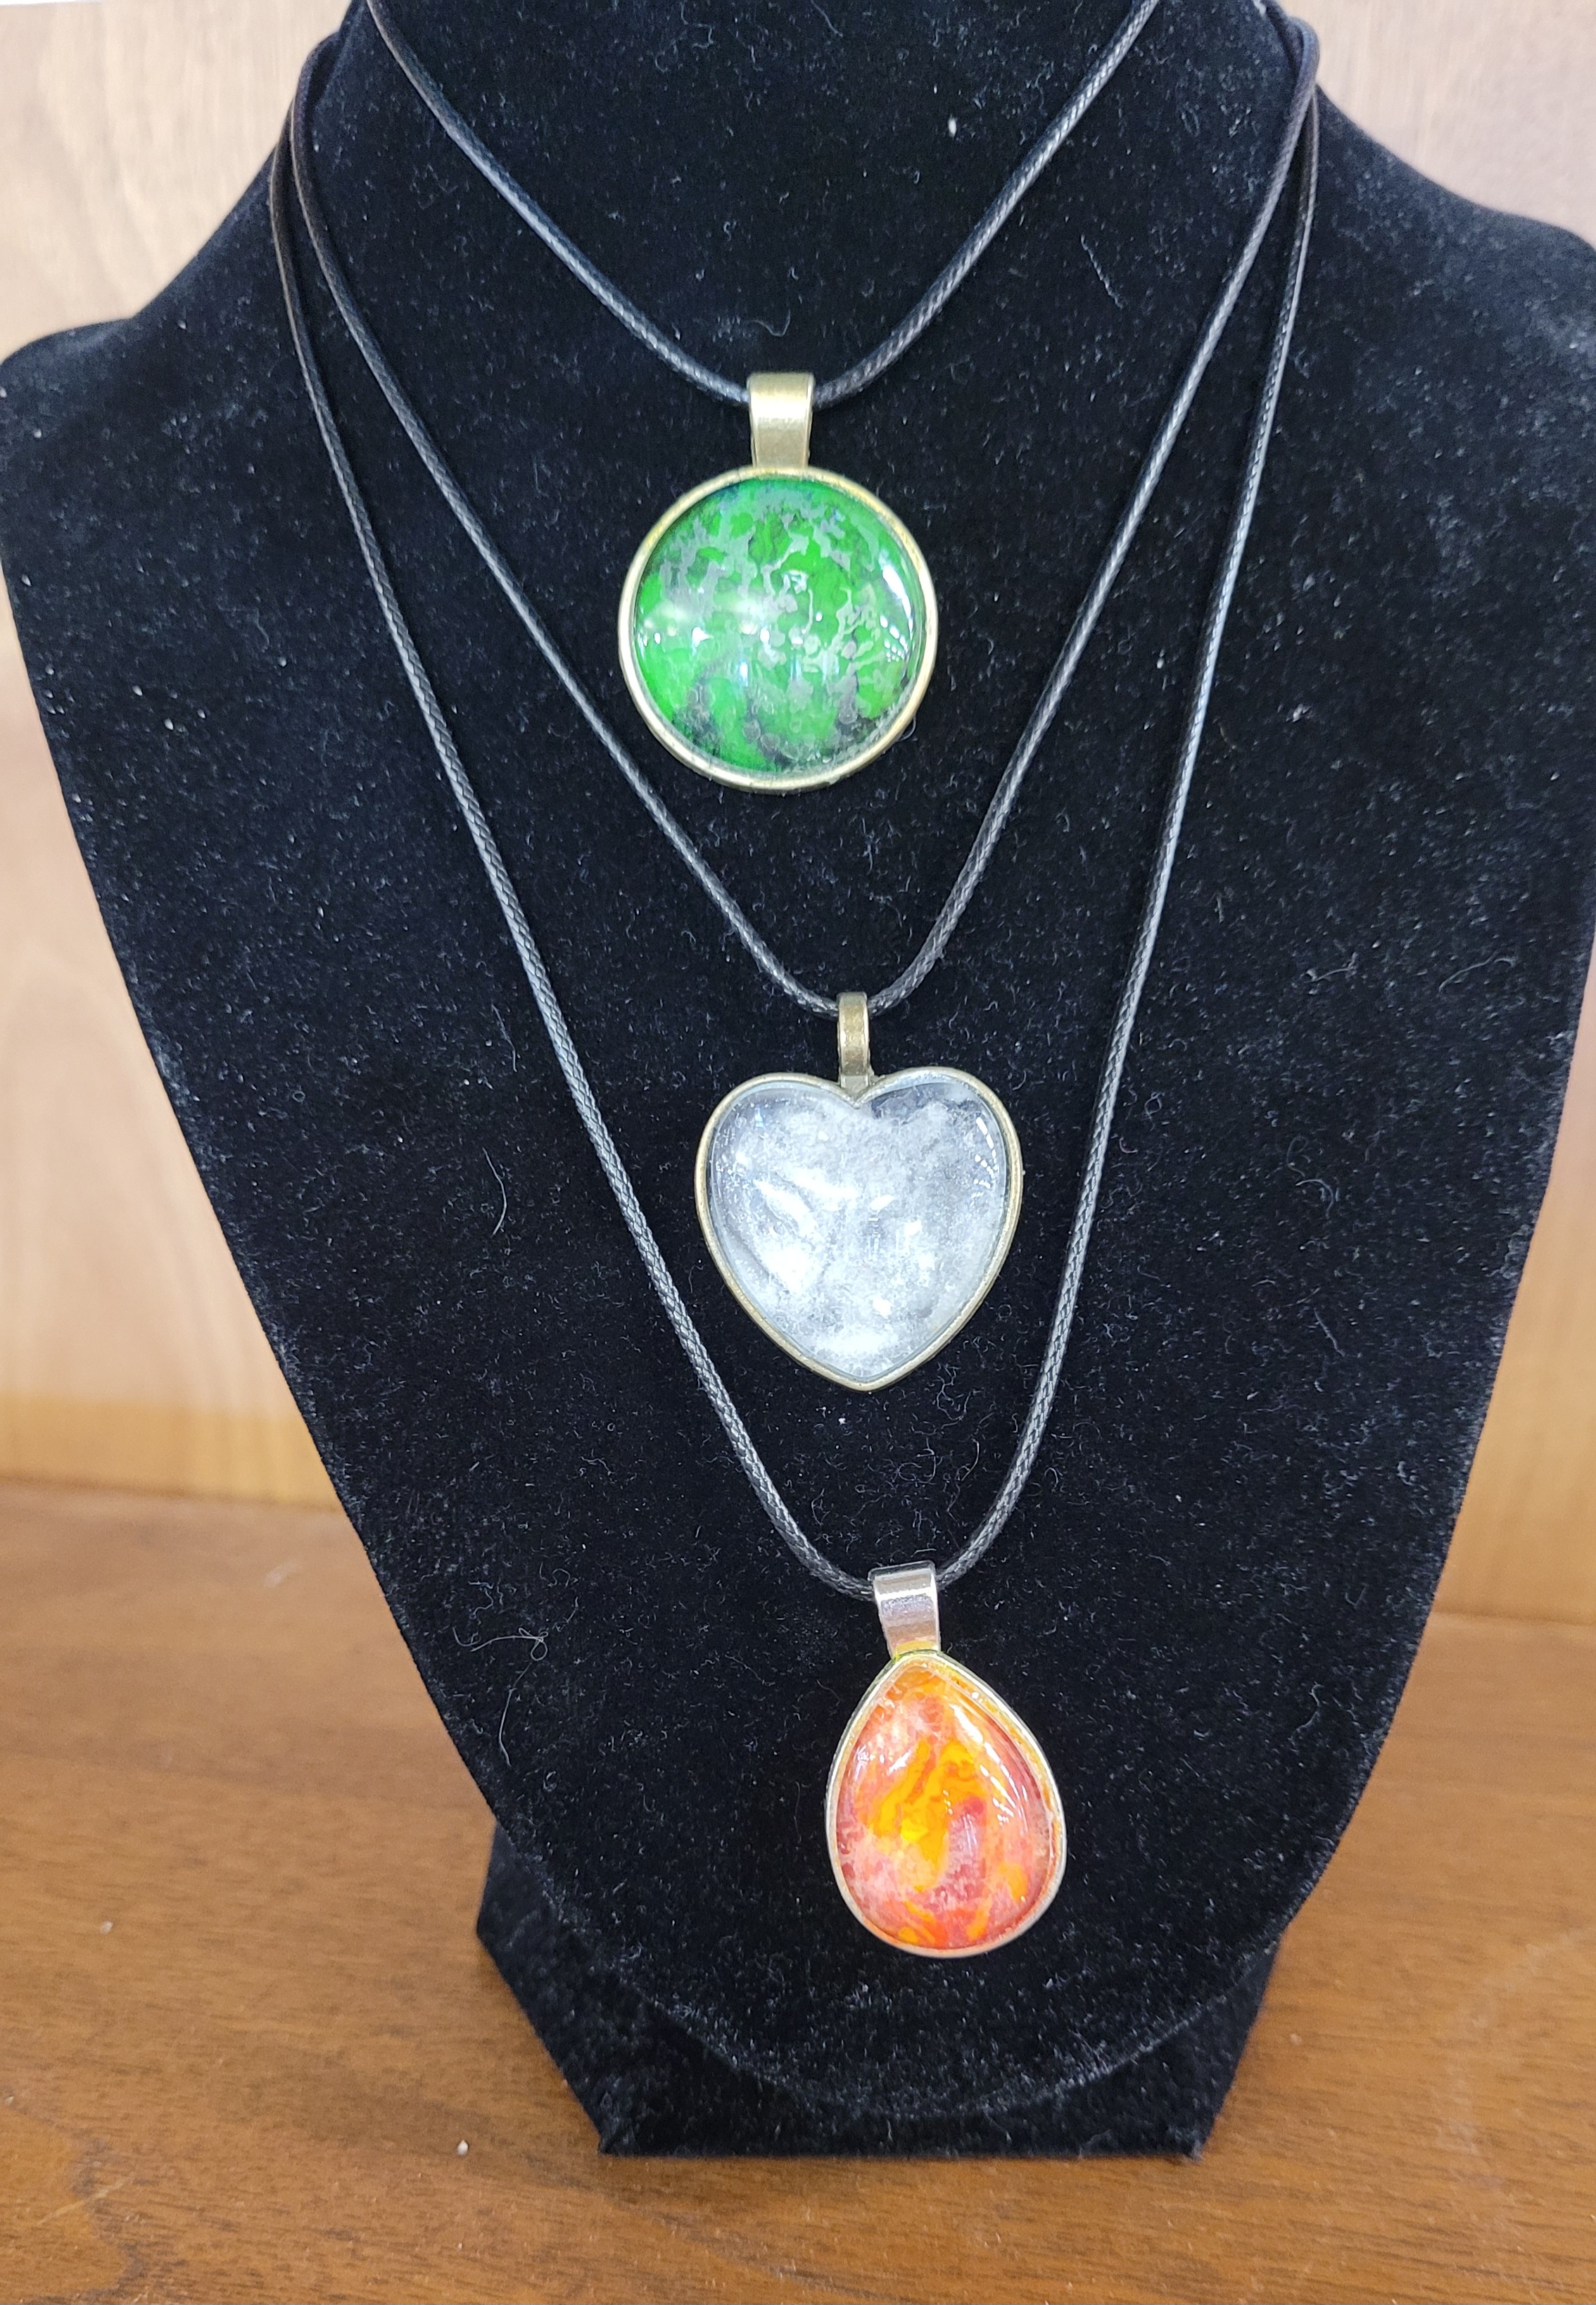 Three colored necklaces on a black display stand.